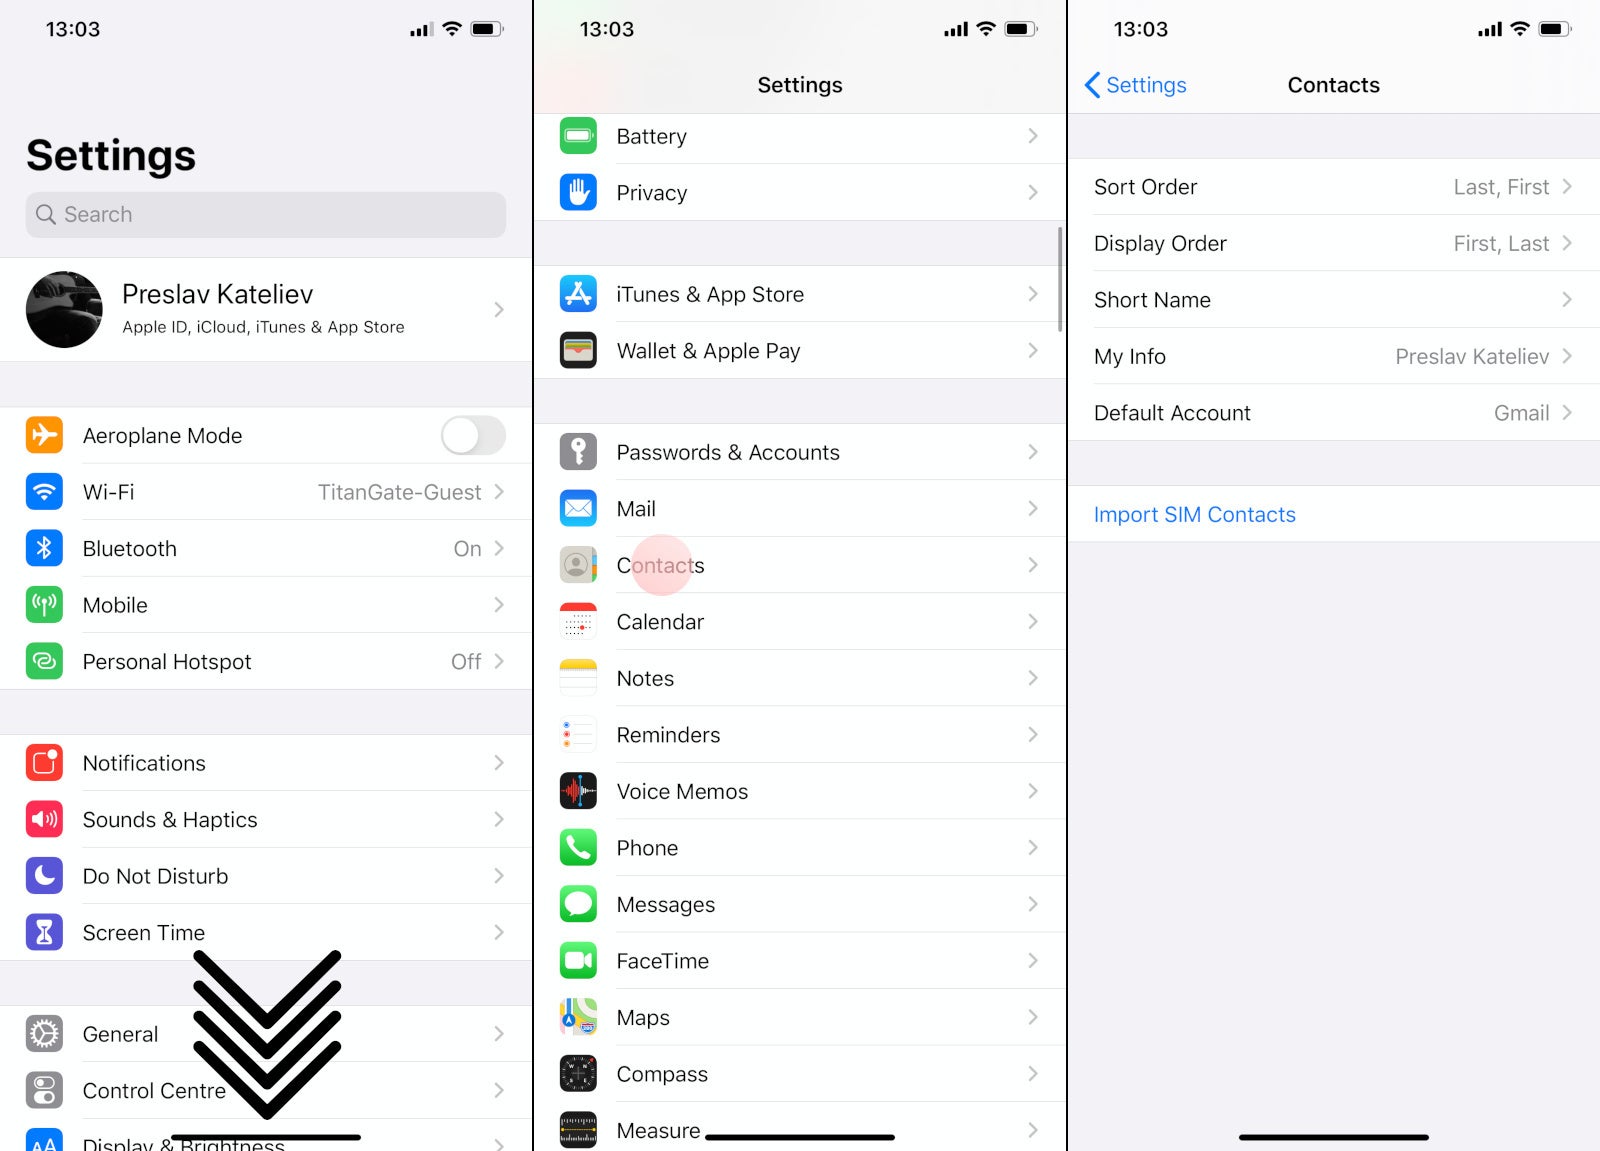 How to sort contacts by first or last name on iPhone